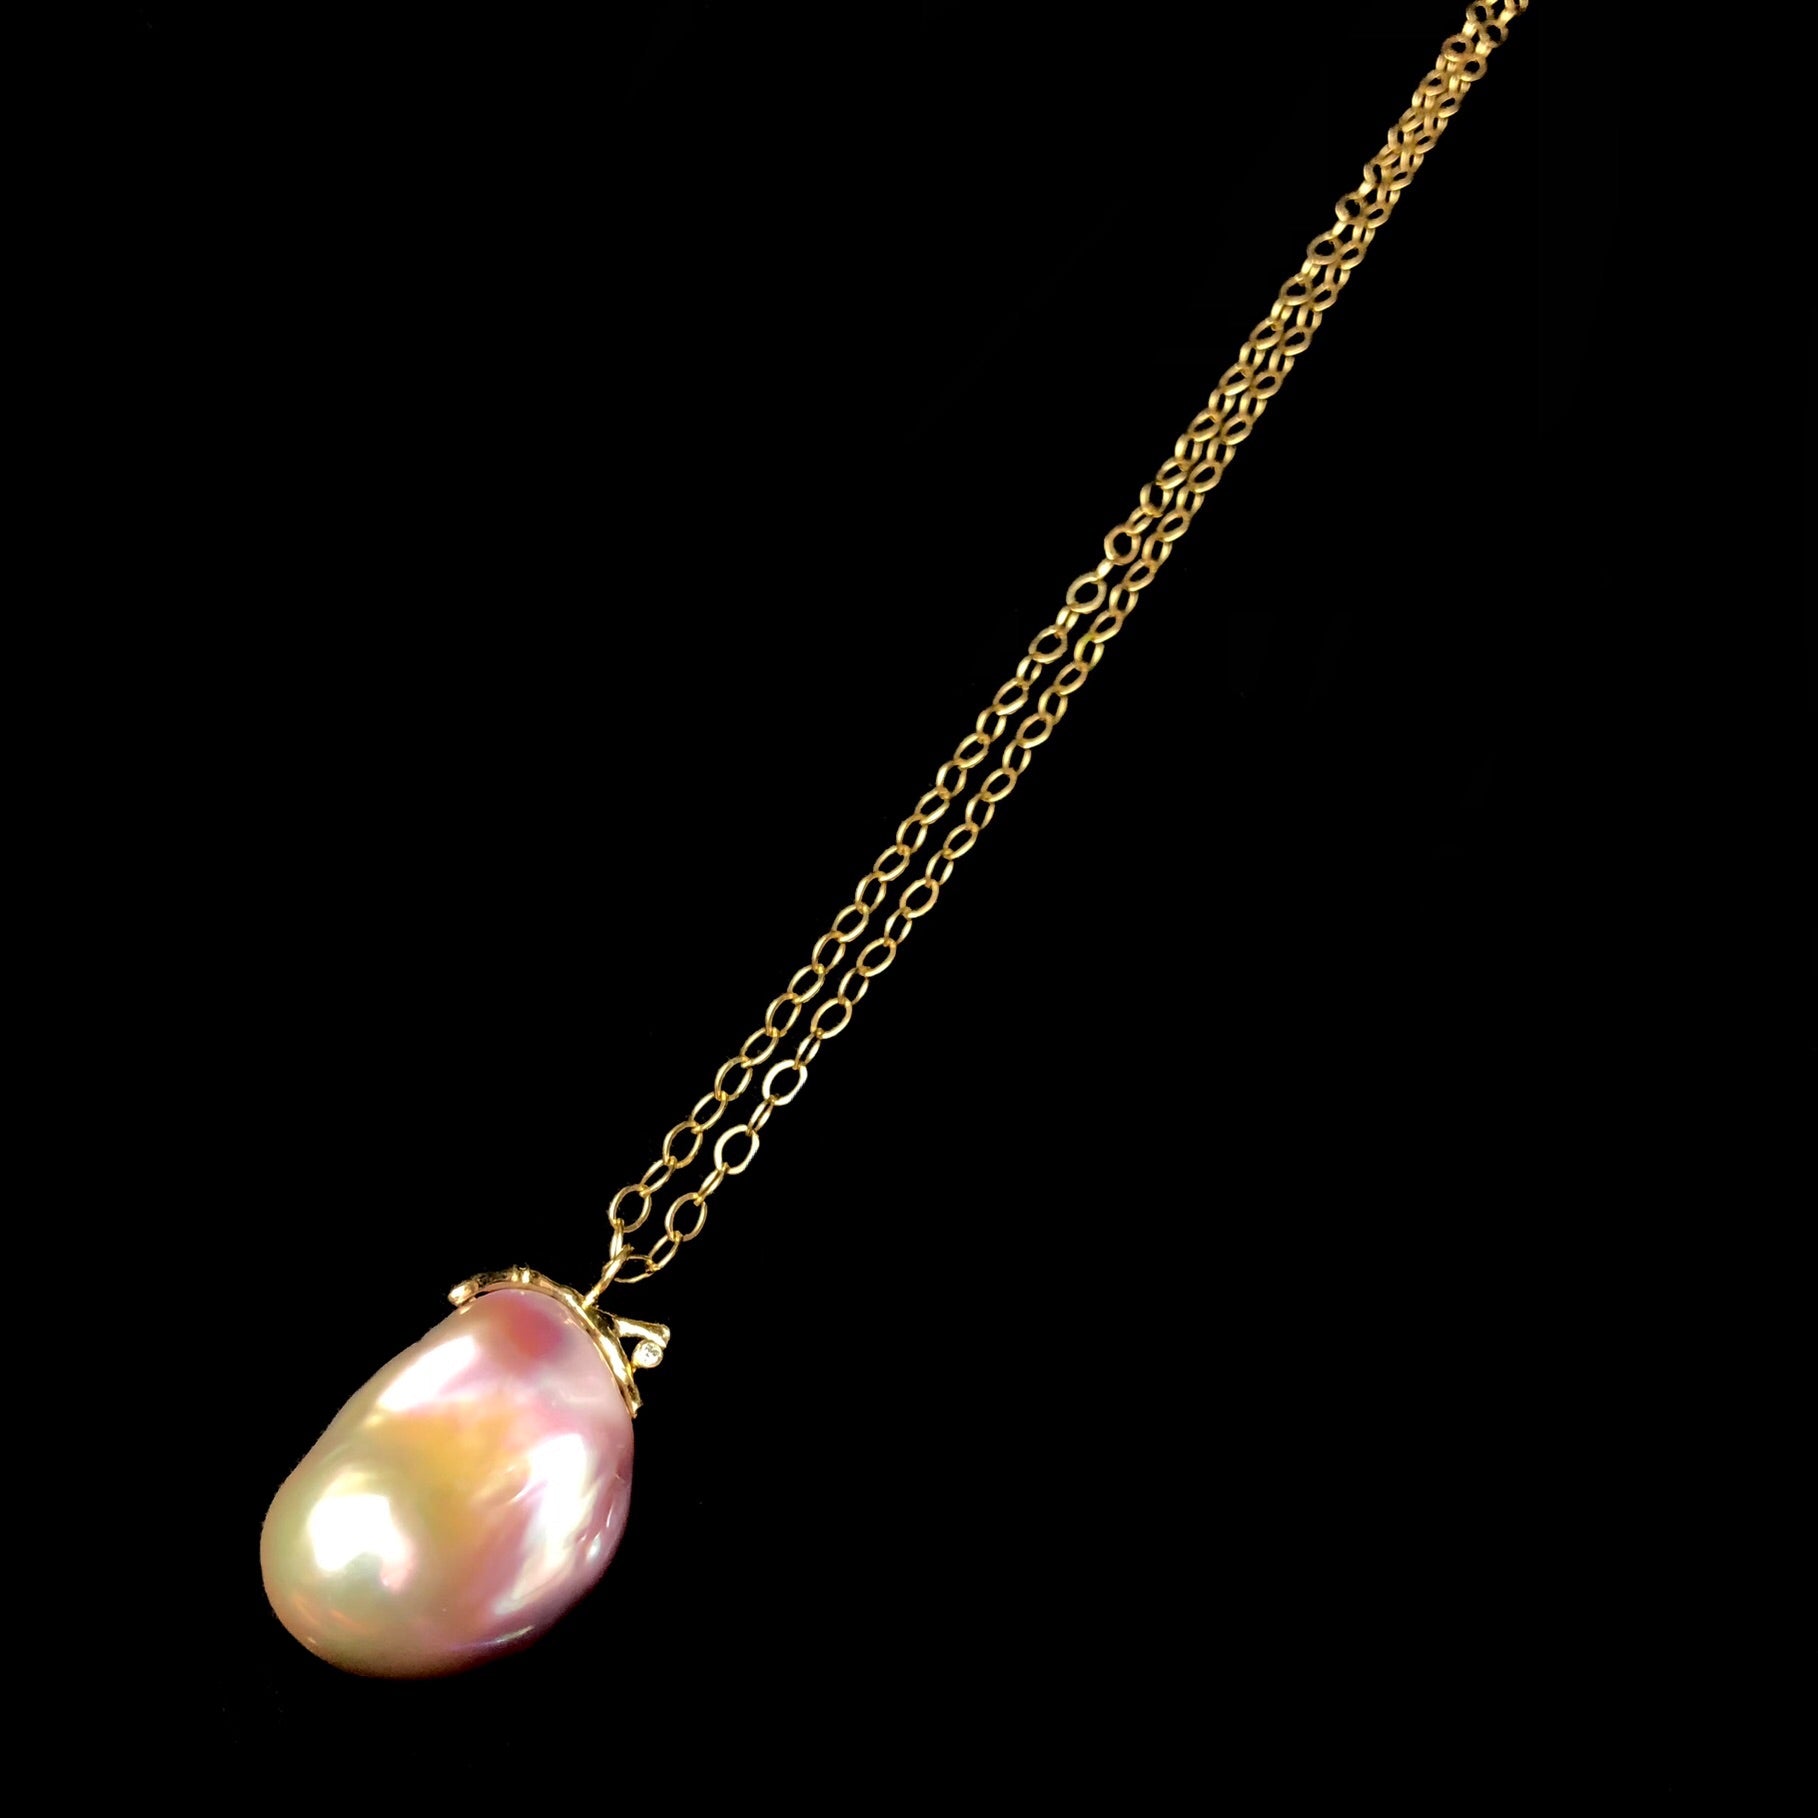 Side view of Pink Yangtze Pearl Necklace with round shape of the pears bottom end